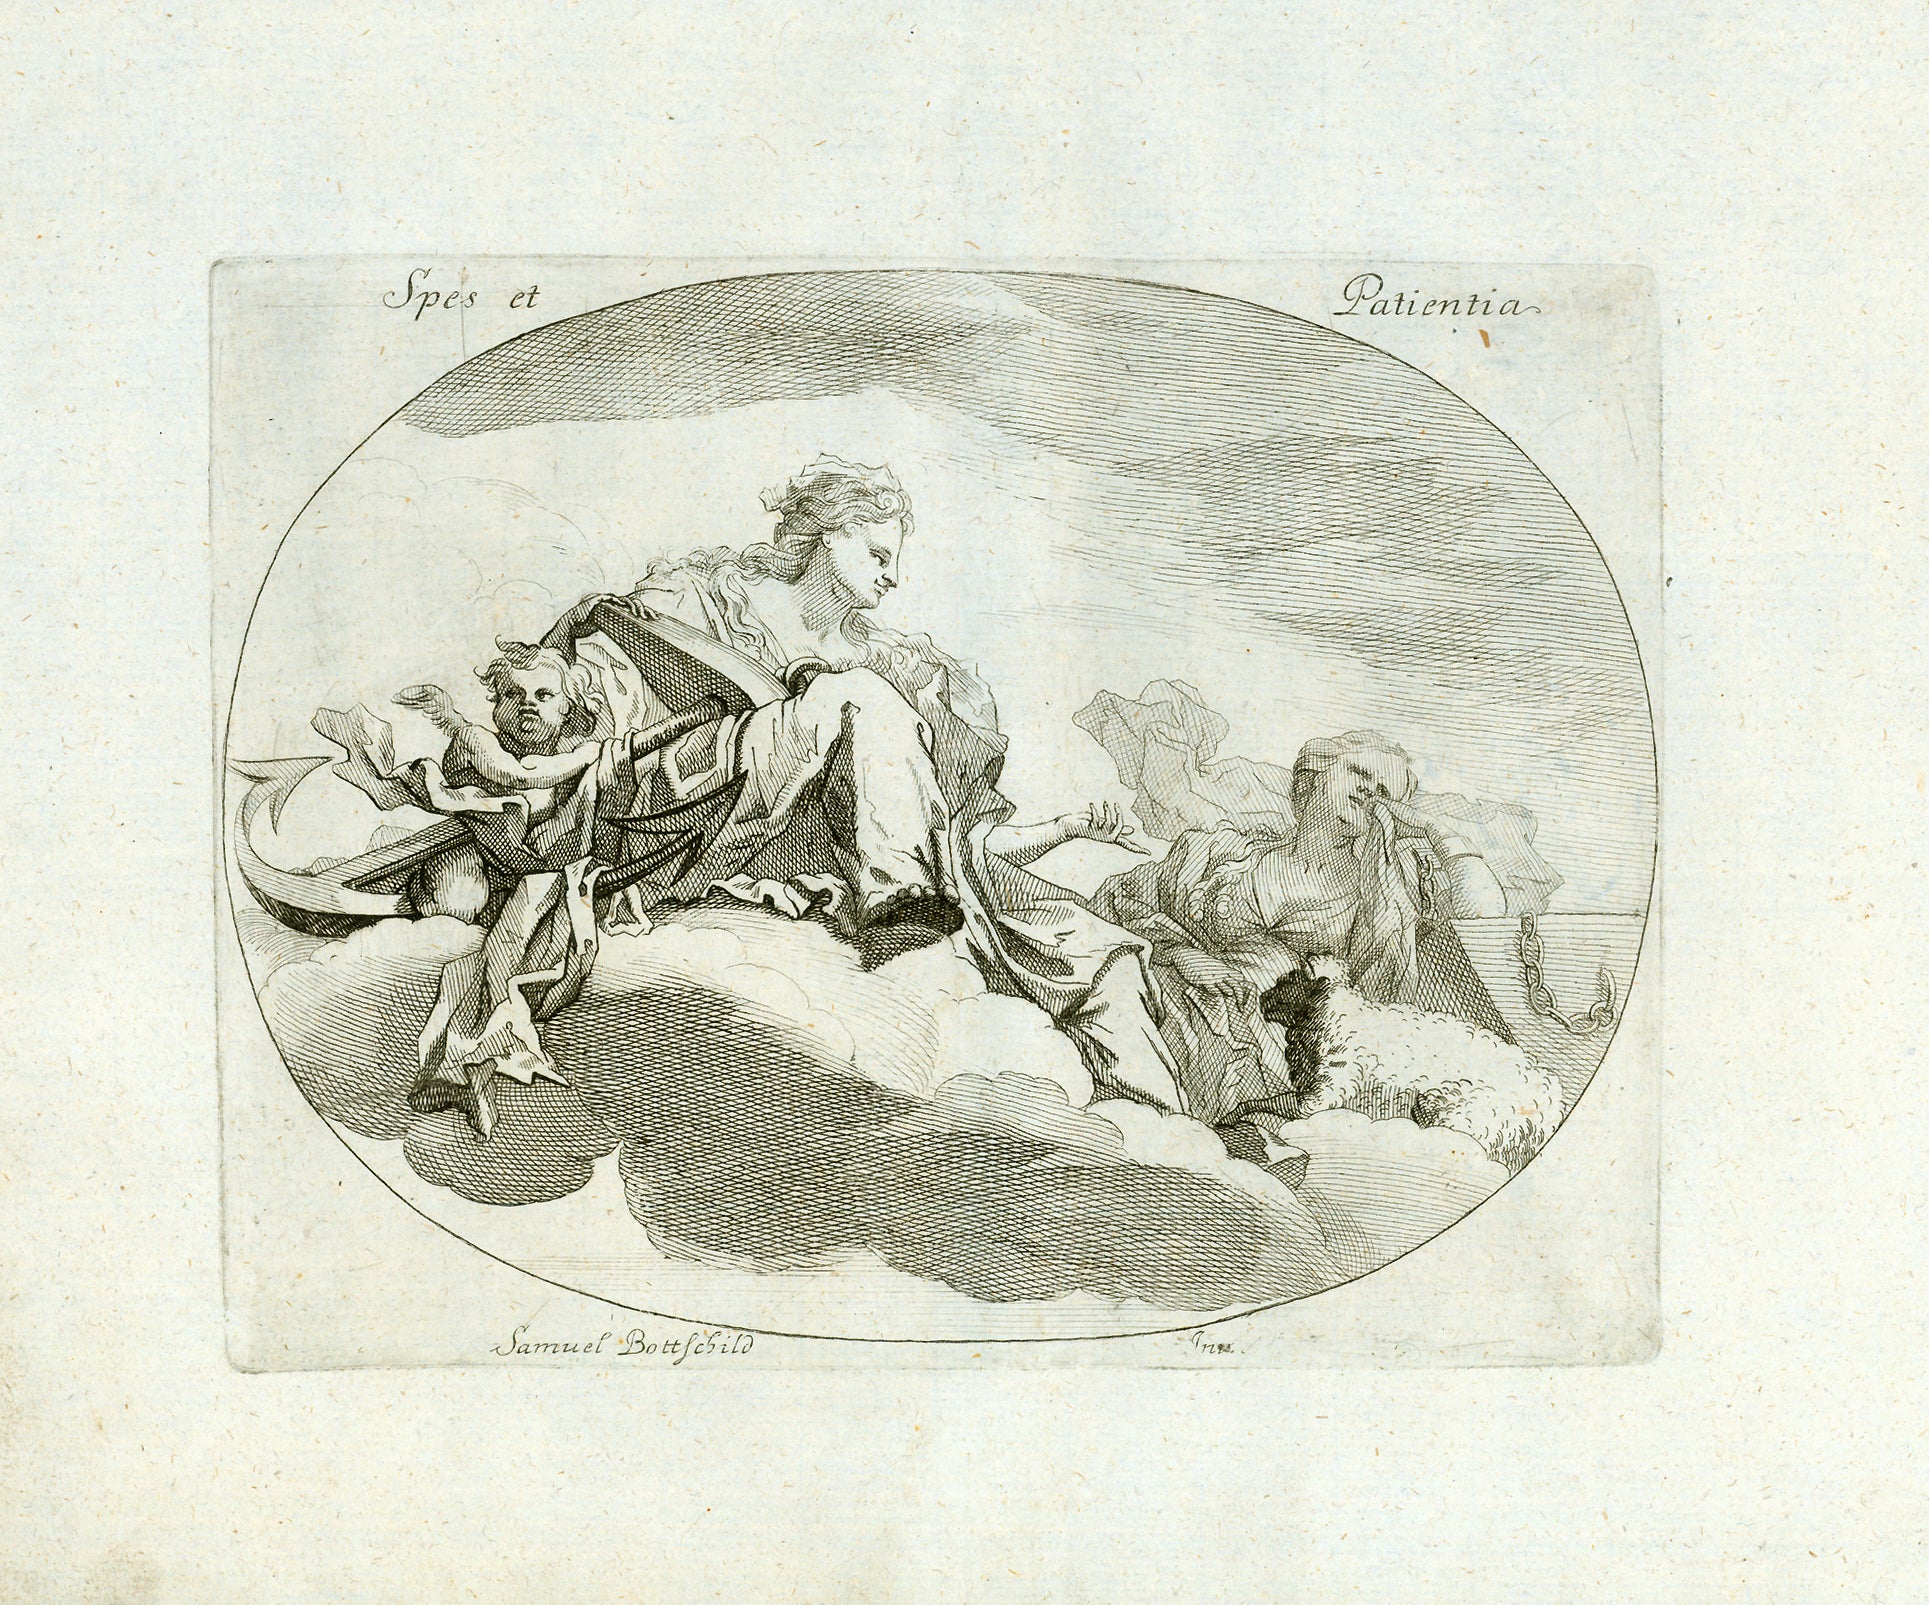 "Spes et Patientia" (Hoffnung und Geduld) (Hope and Patience)  The Roman godesses in the clouds. Spes has th attribute of an anchor and Patience is chained to a wall.  Copper engraving by Samuel Bottschild (1641-1706) Published ca. 1680.  Original antique print 